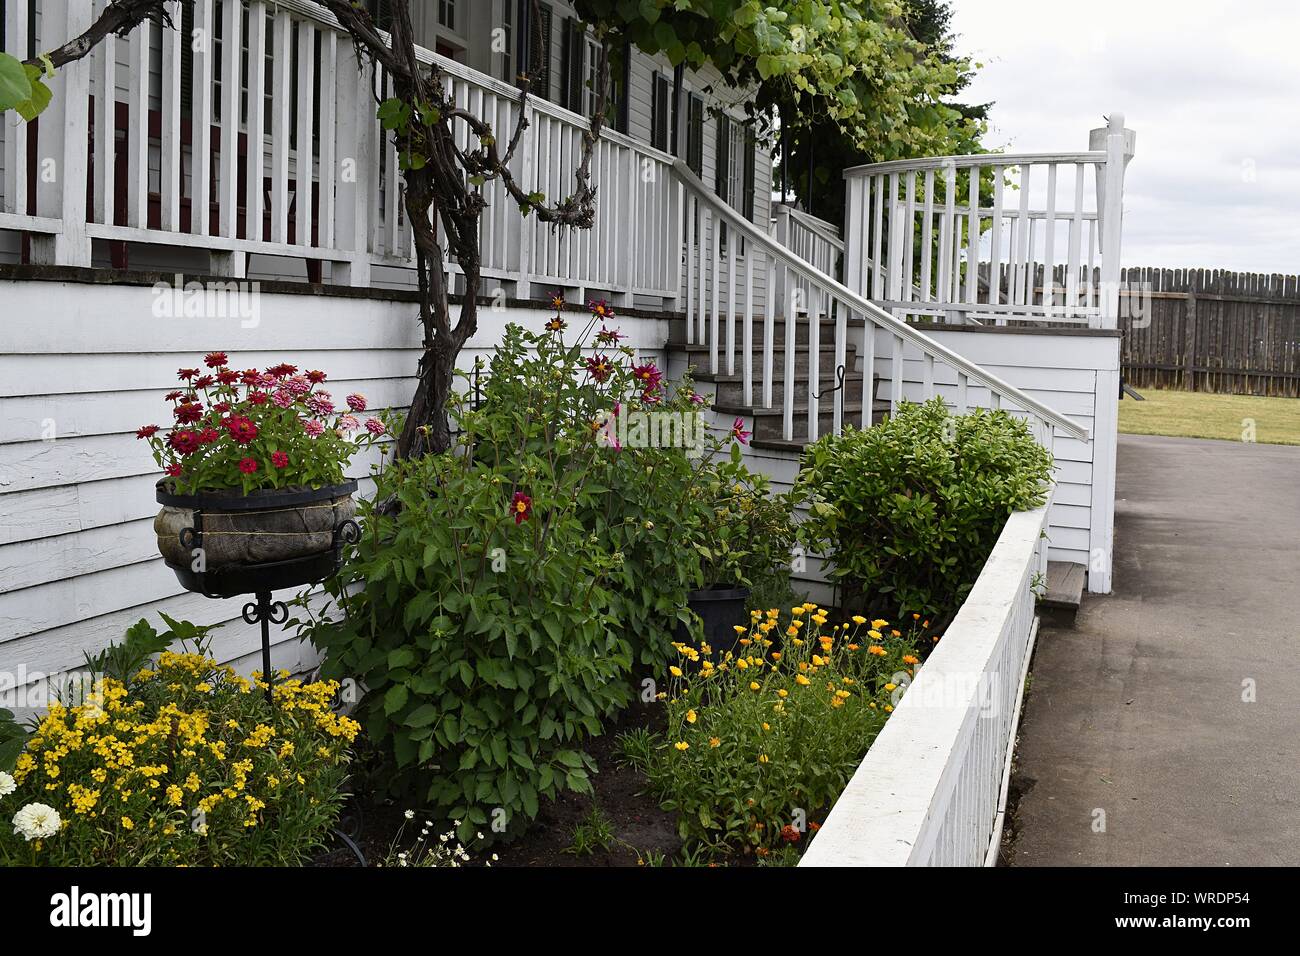 Vancouver, WA USA – June 14, 2019: Keeping up proper British standards the Chief Factor's Residency is still decorated with flower beds. Stock Photo